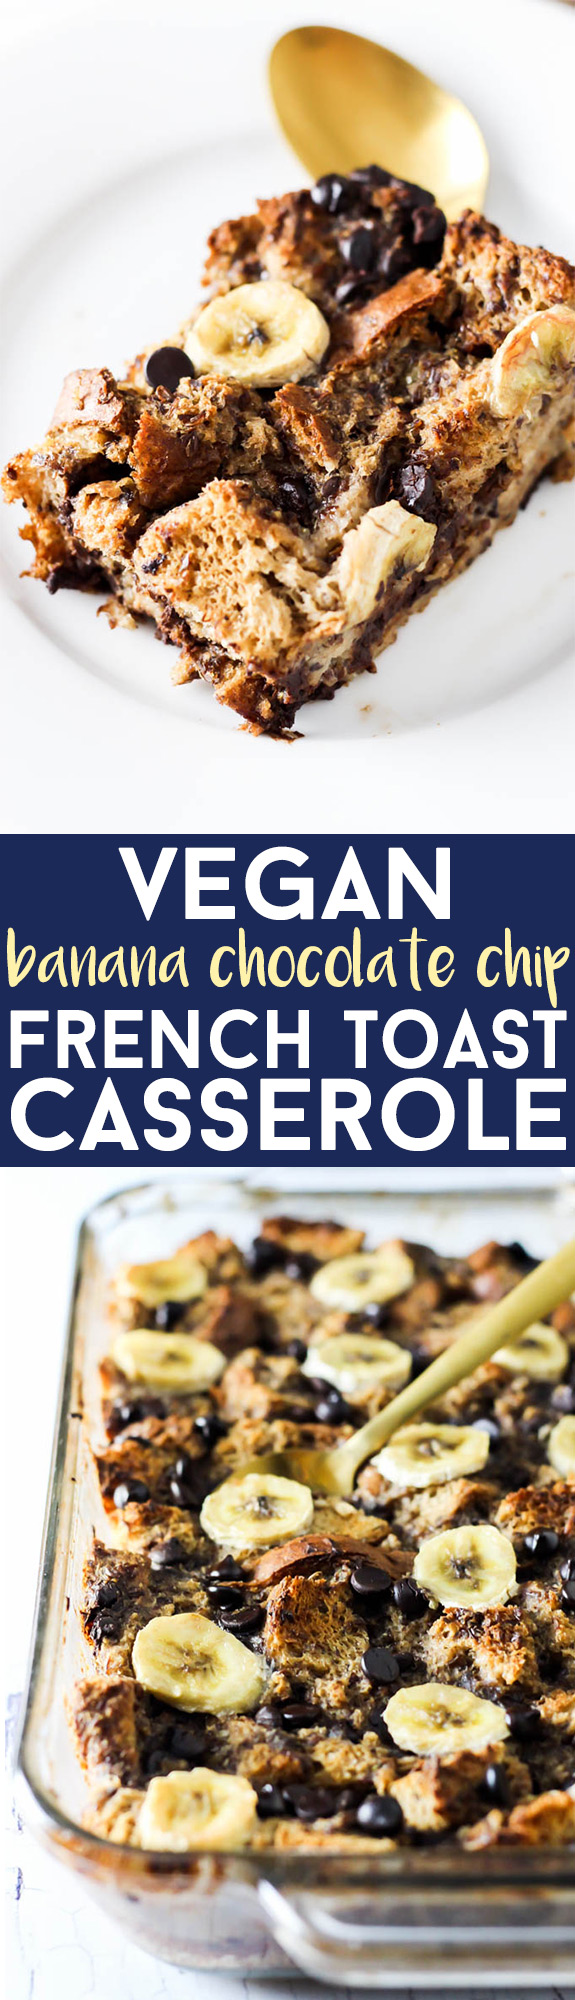 This Banana Chocolate Chip Vegan French Toast Casserole is the most delicious way to start any morning! Serve it as a healthier crowd-pleasing breakfast.